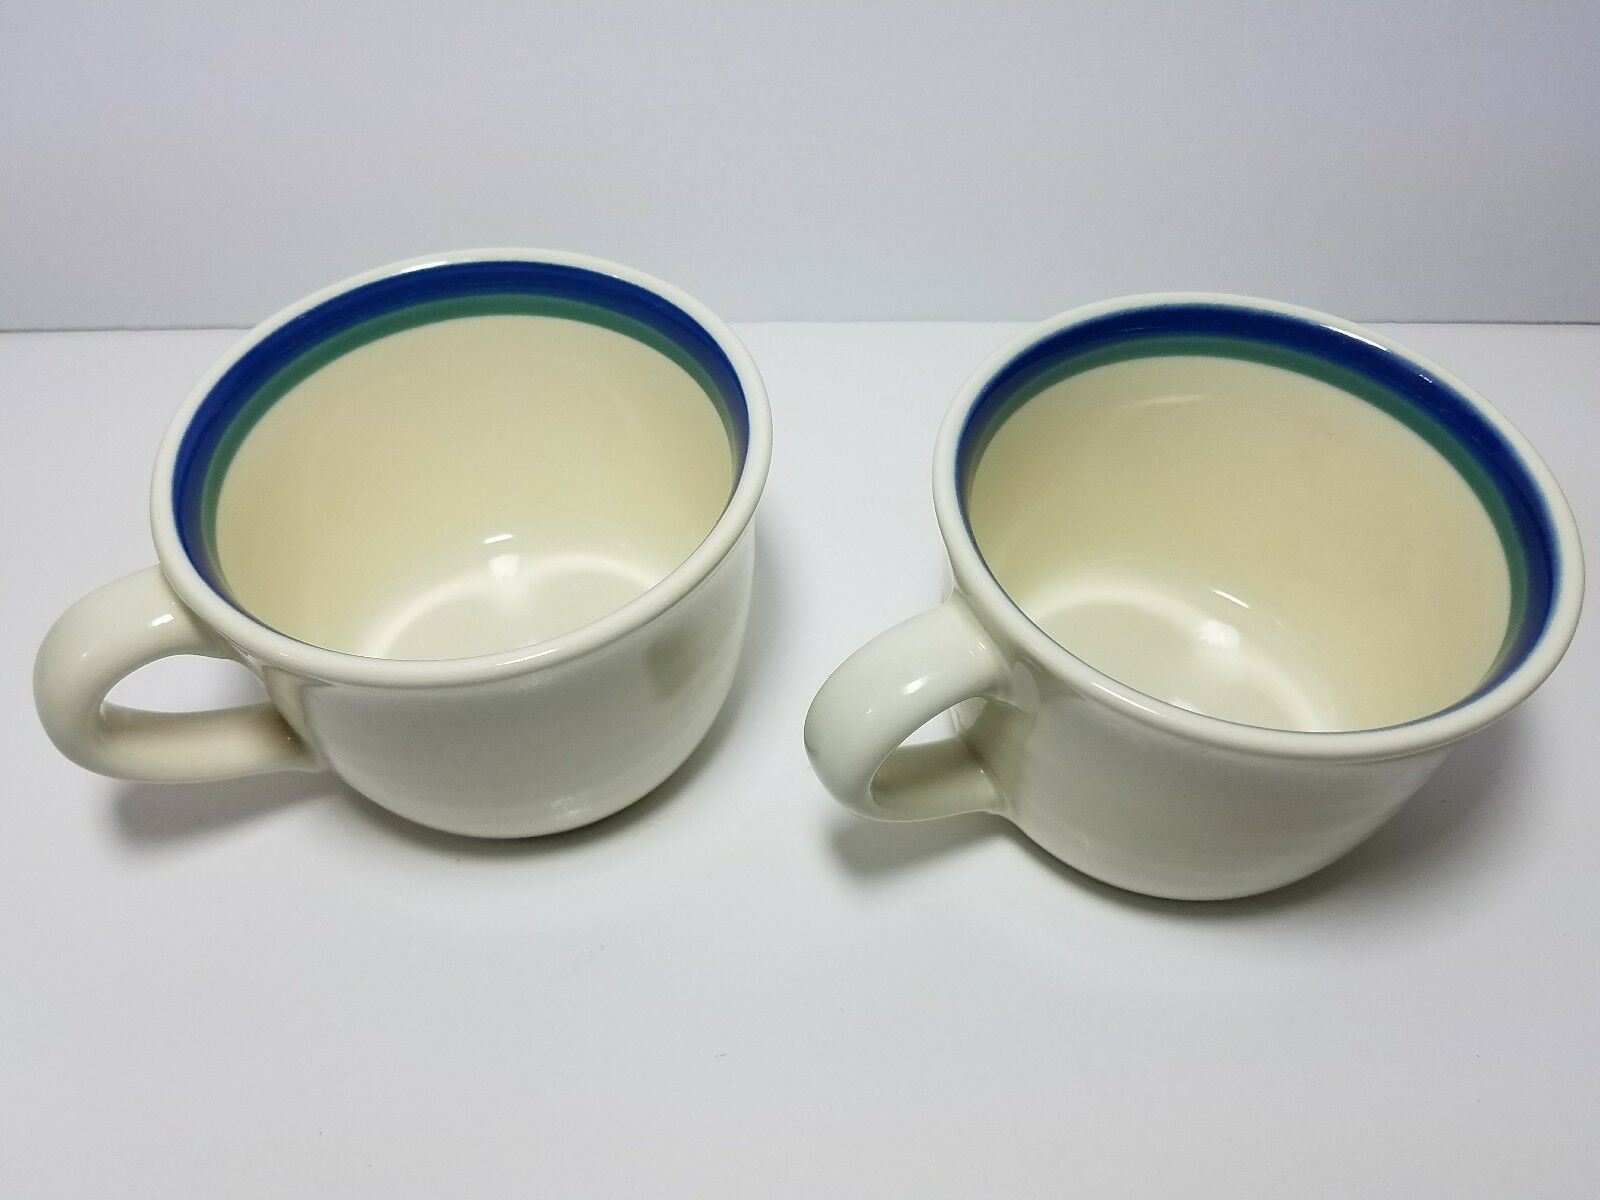 Replacement Set of 2 Pfaltzgraff Coffee Cups Mugs Northwinds Blue & Green Bands - $15.79